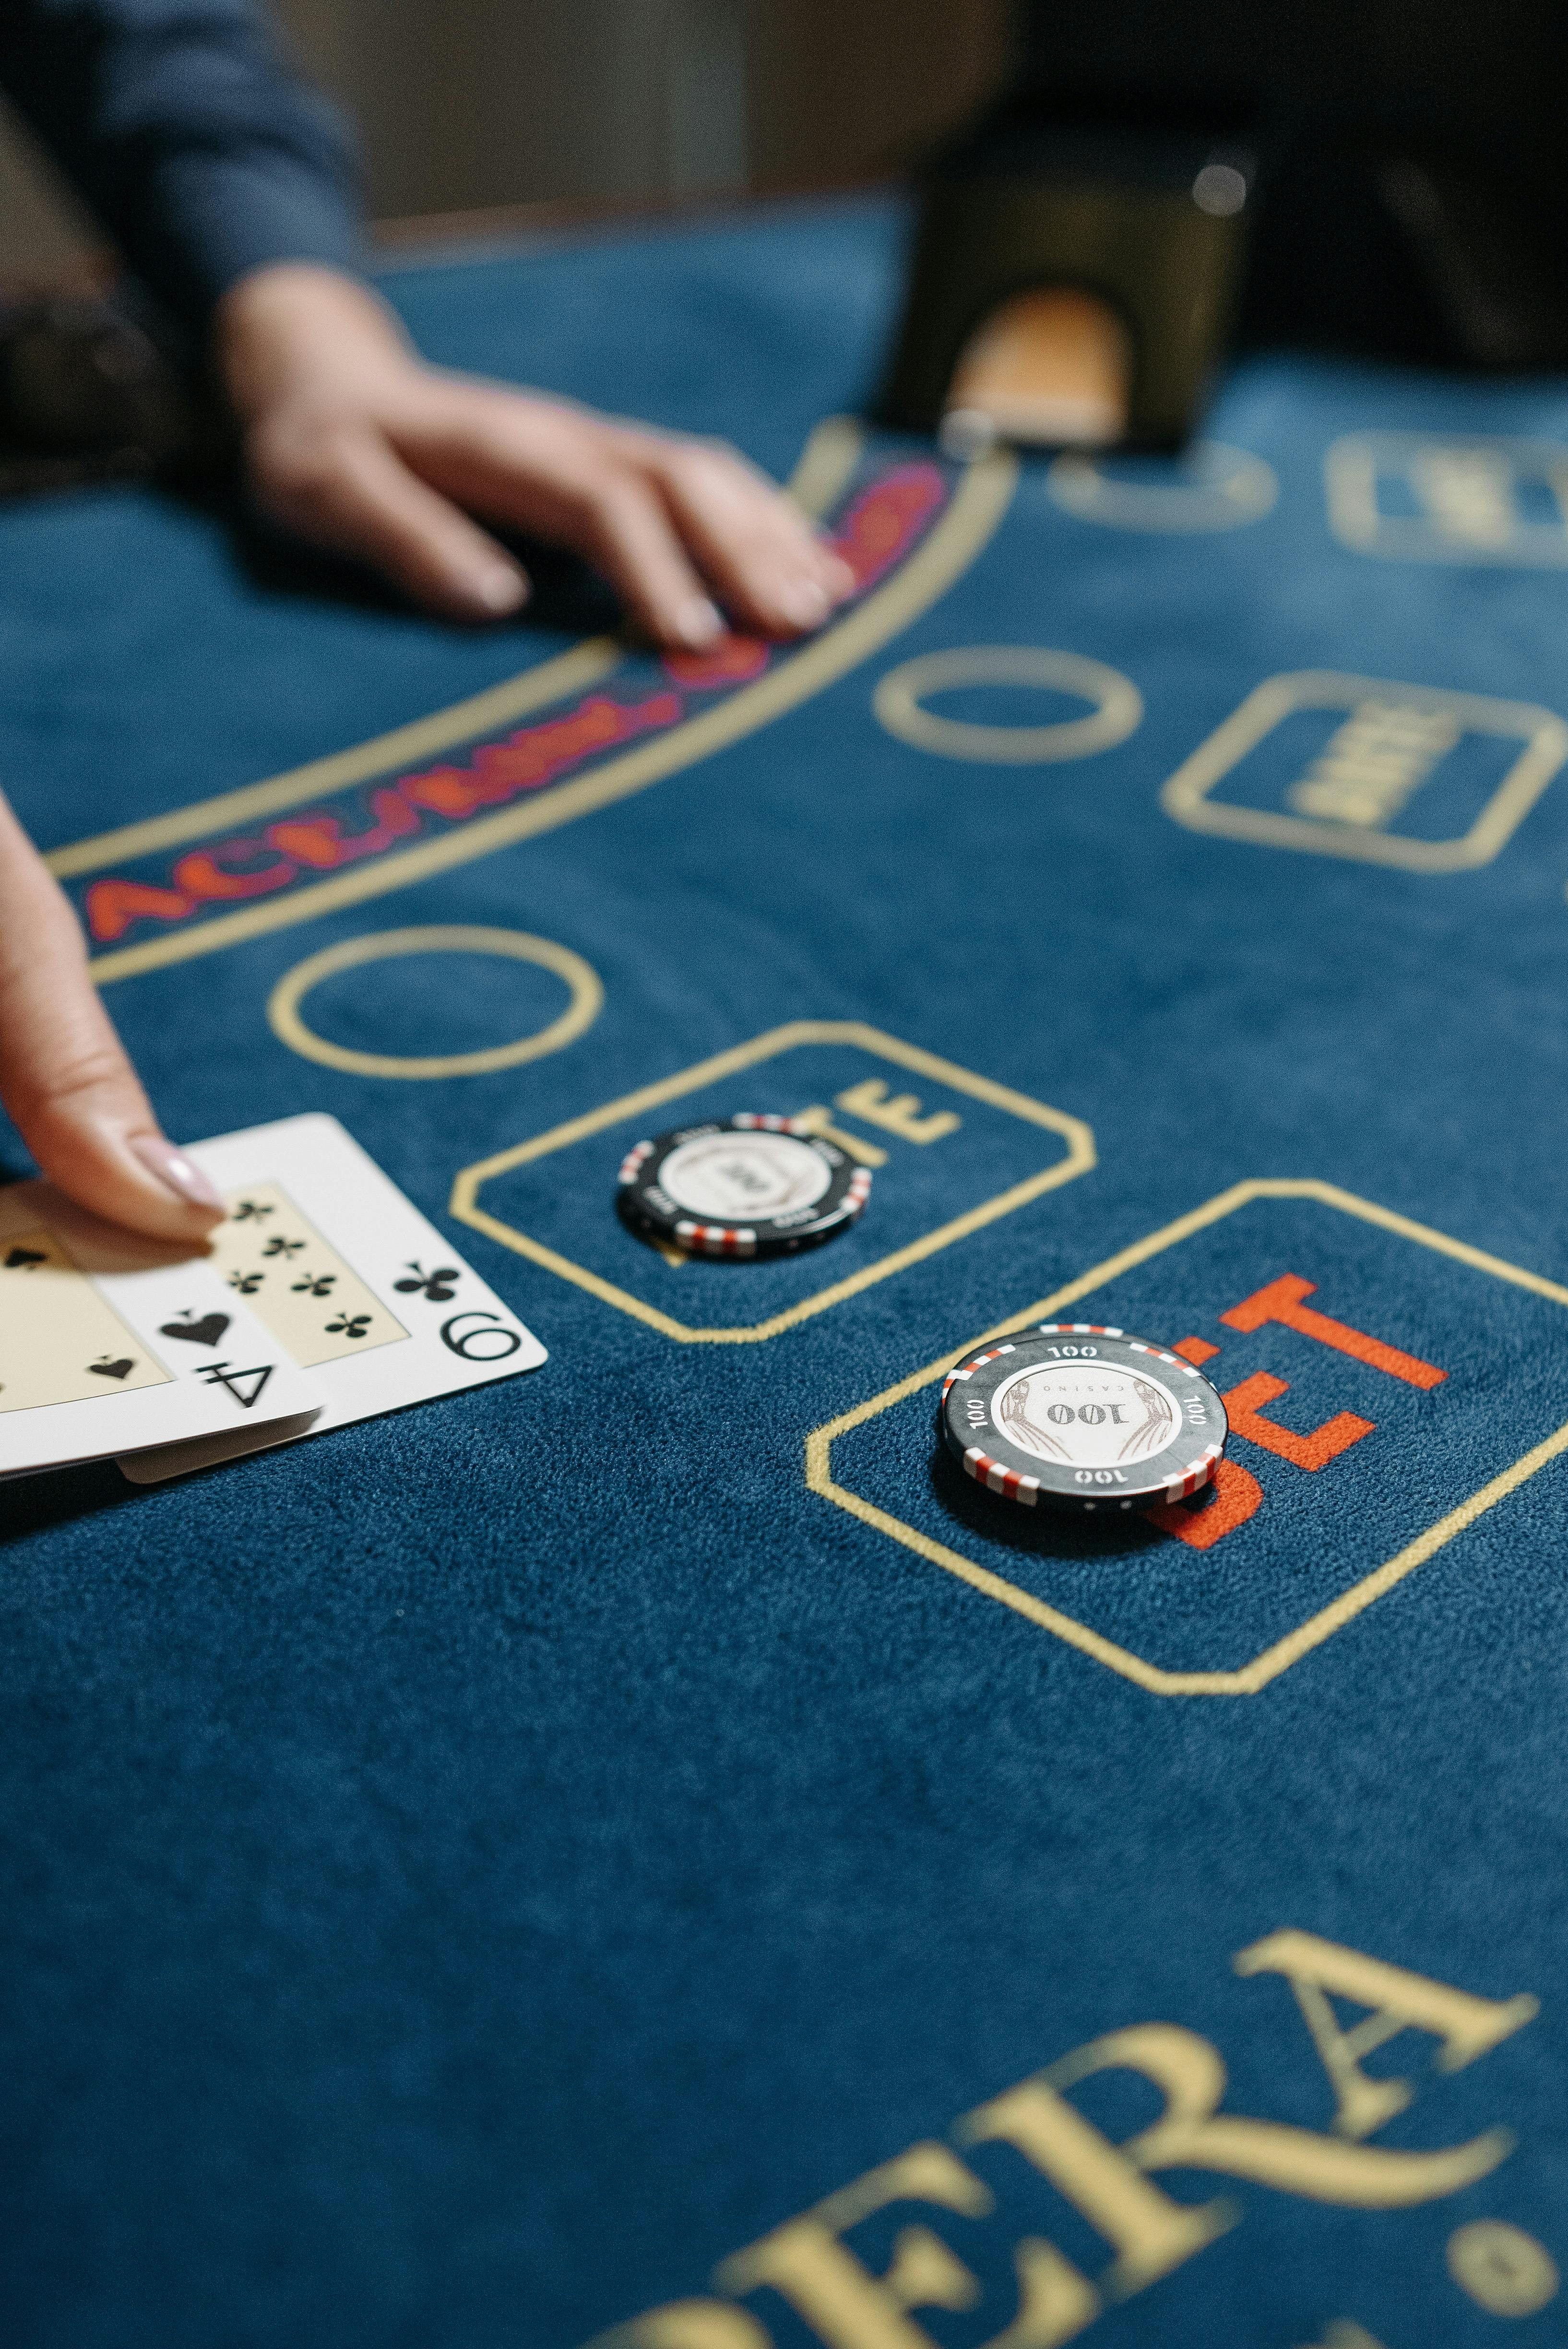 playing cards and casino chips on gaming table